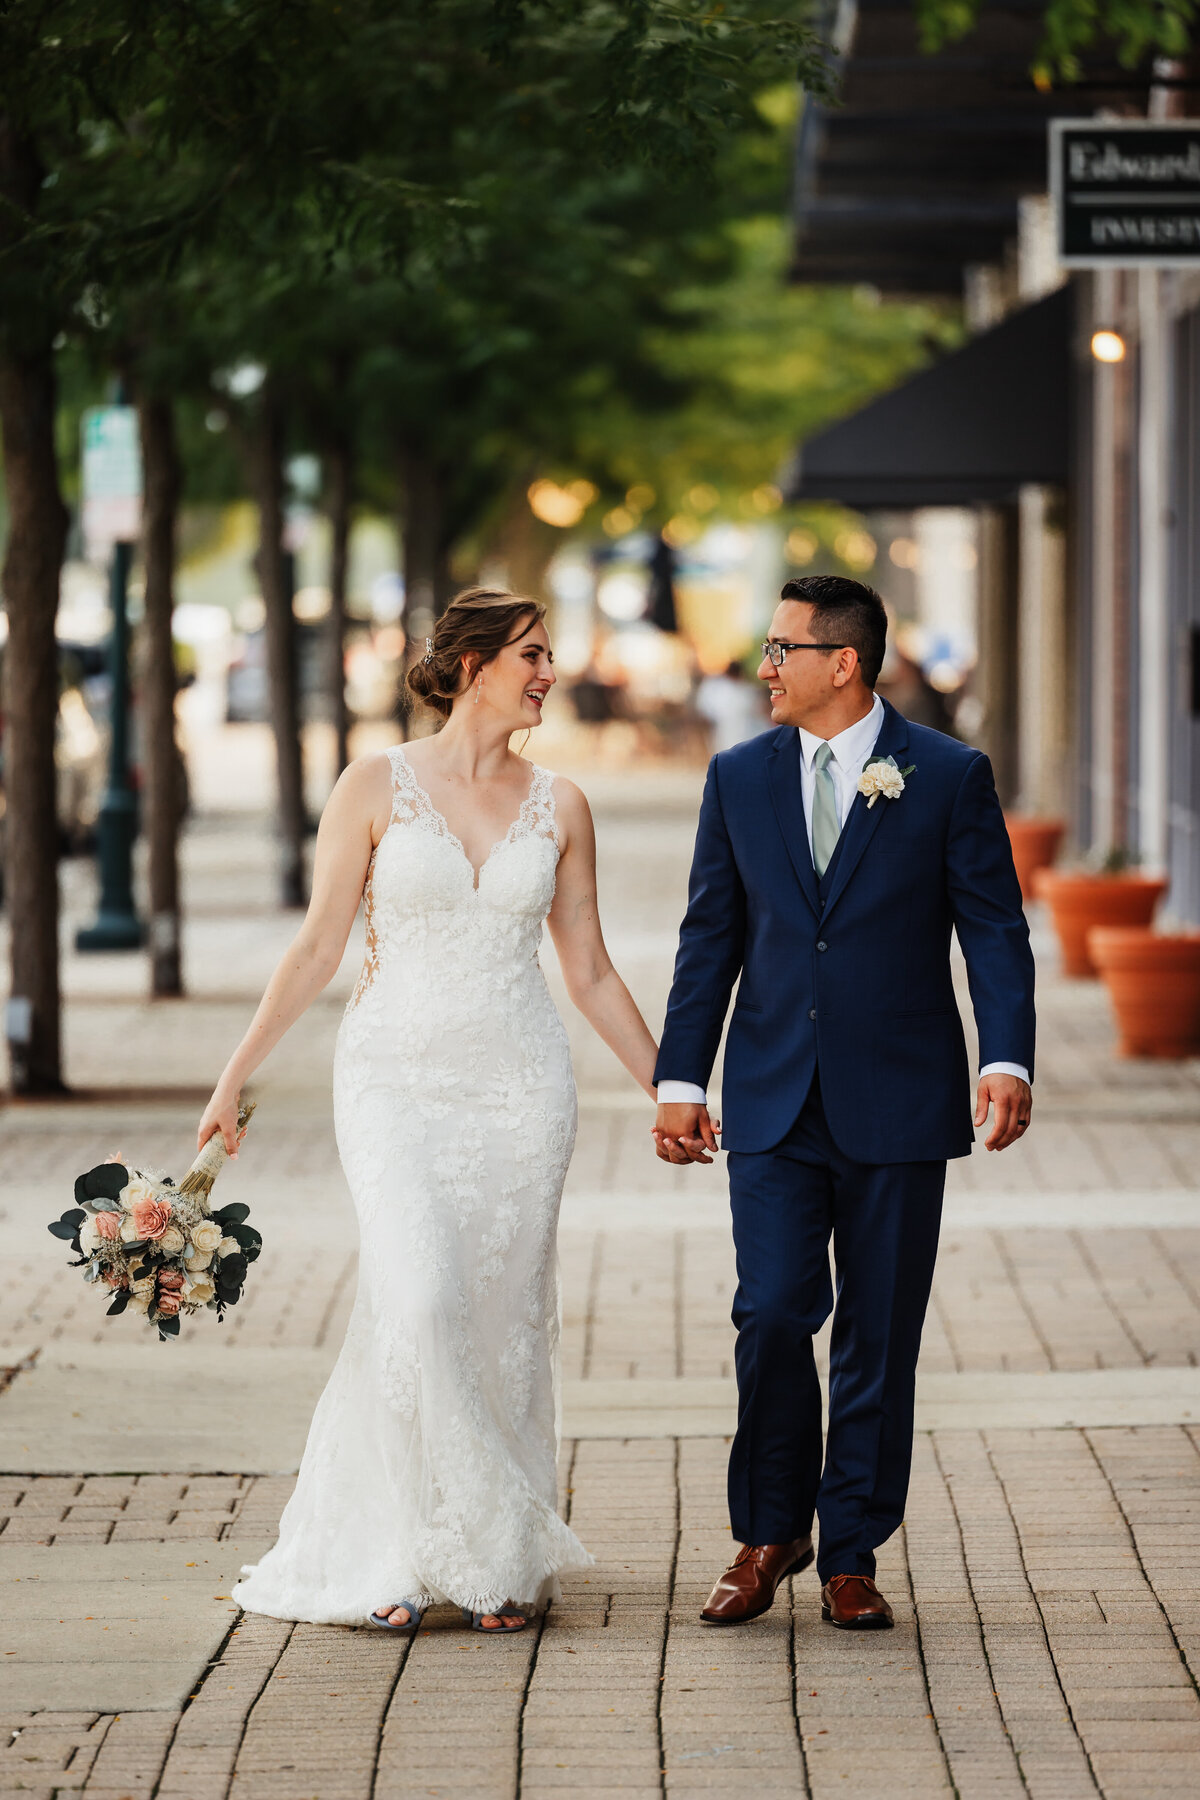 A wedding couple skip down the street in downtown Lemont.